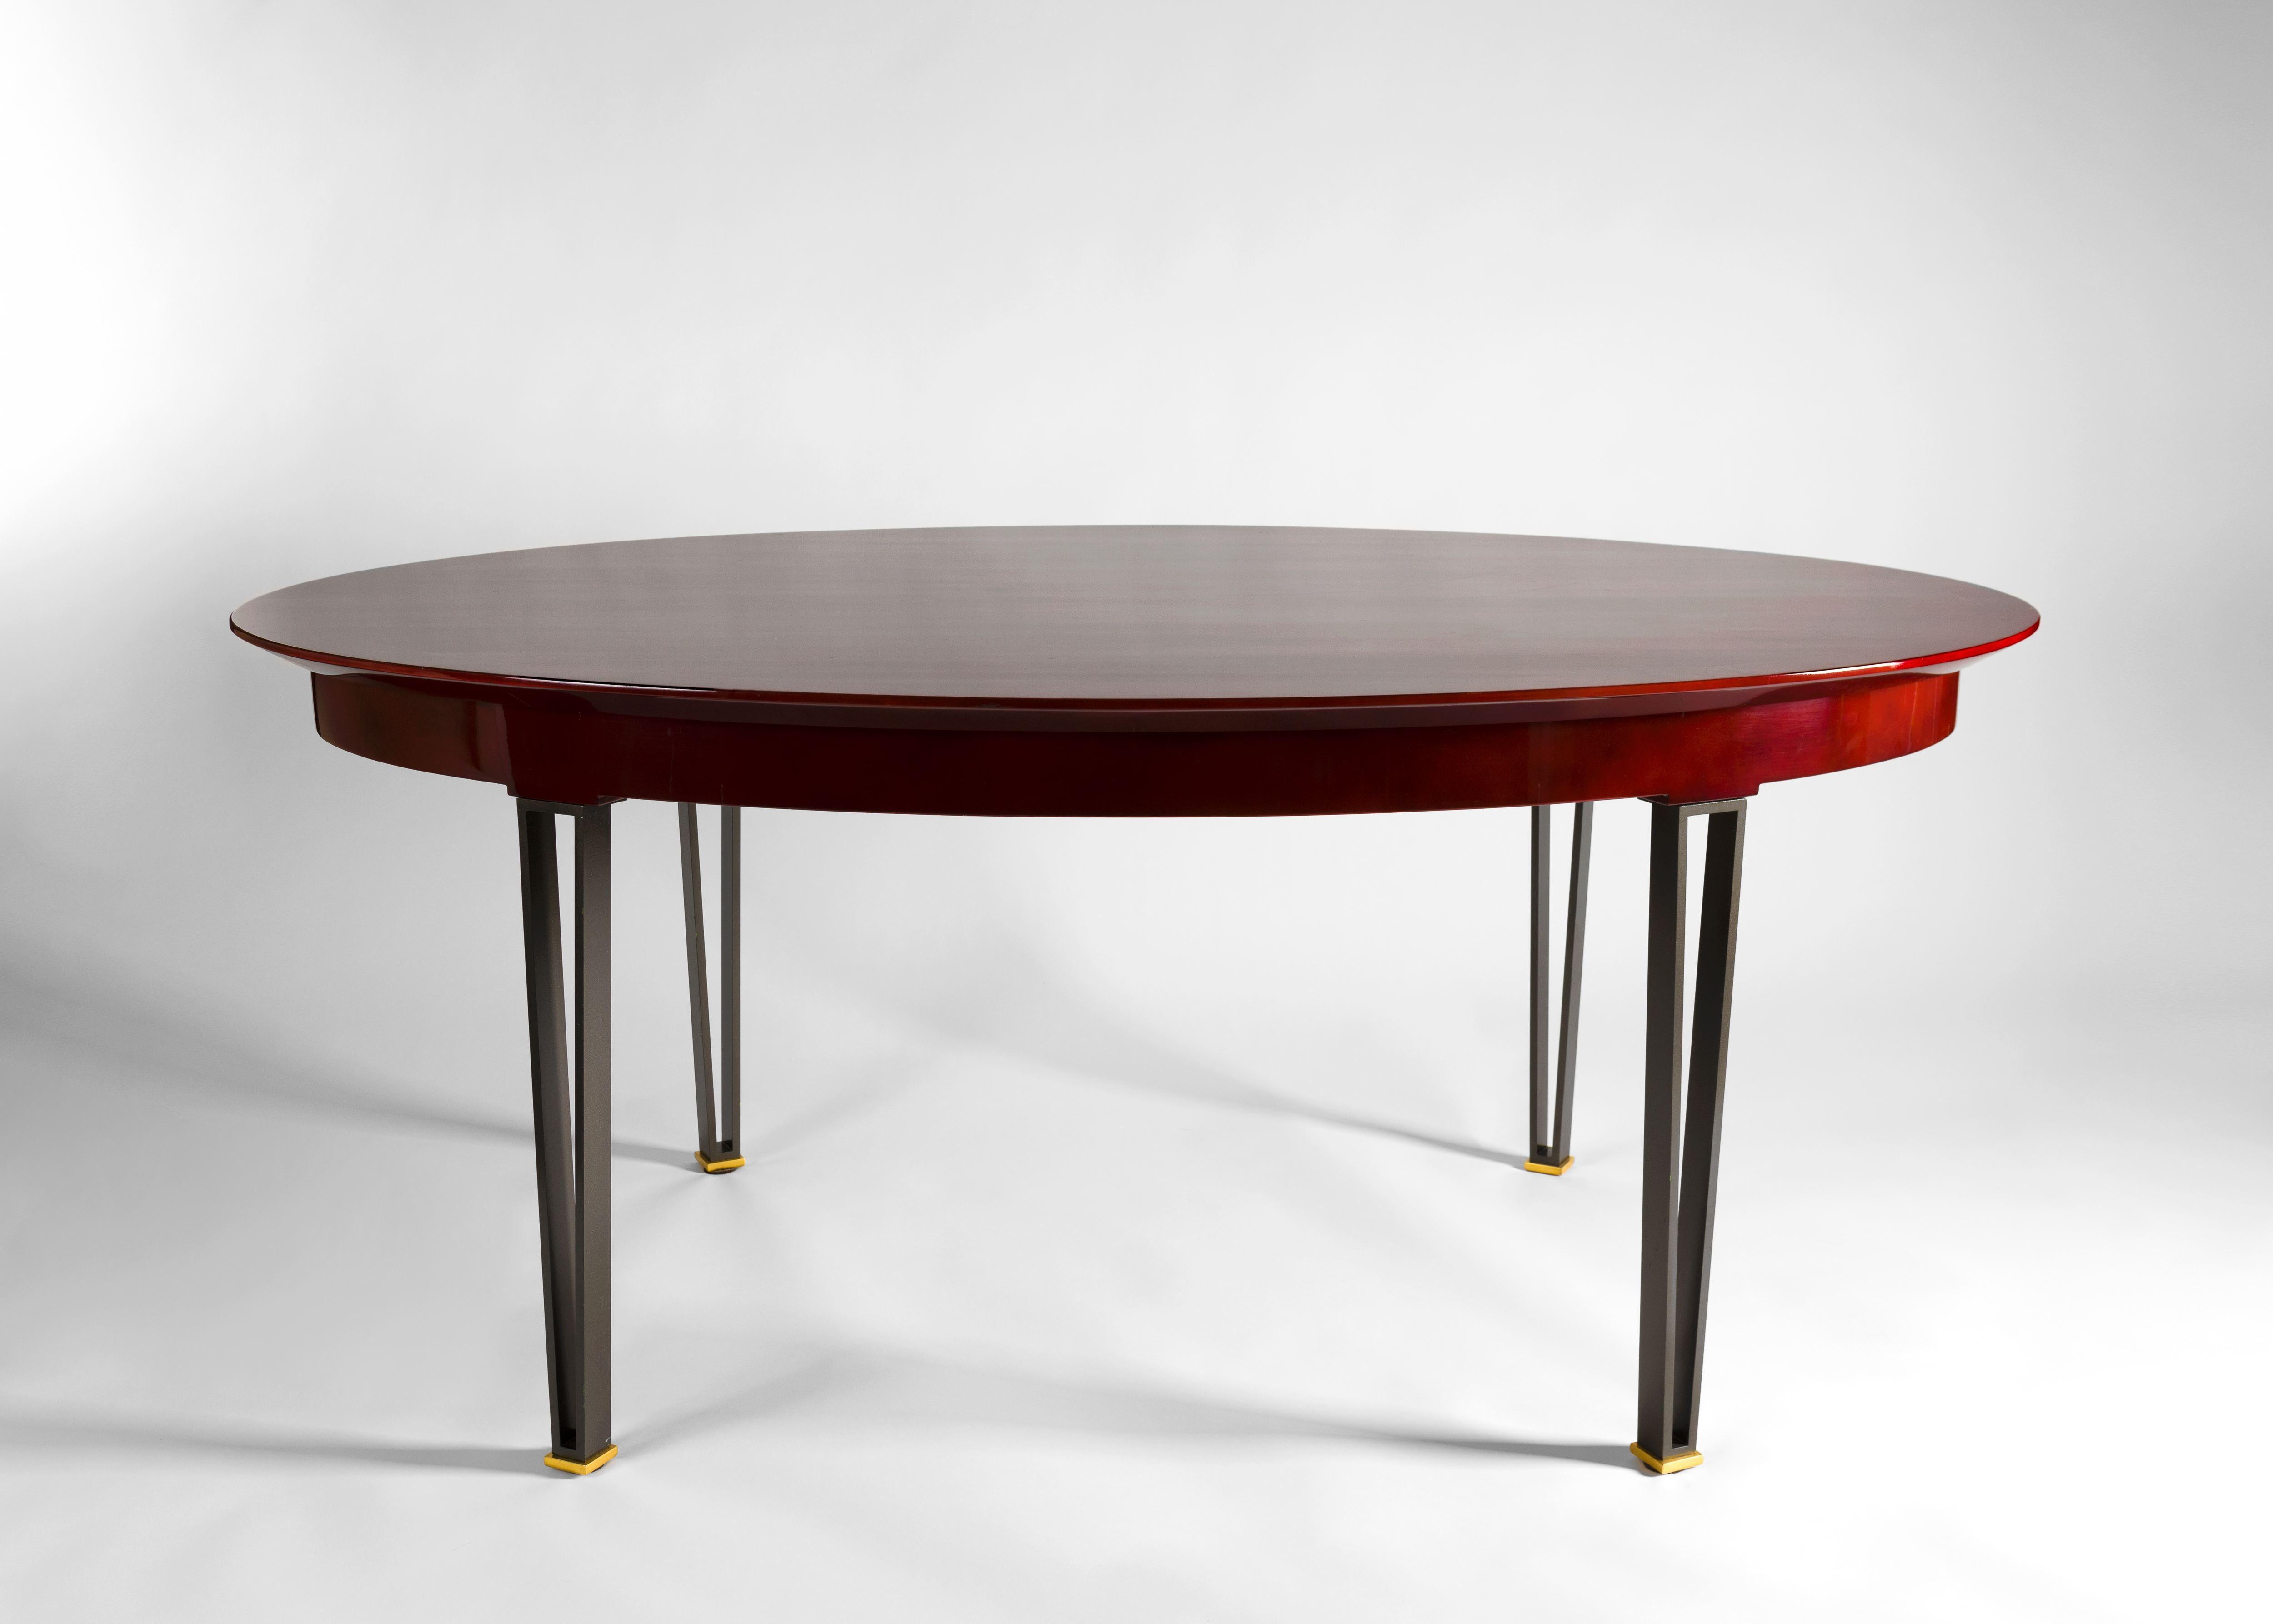 Designed for the Villa Me´dy Roc in Cap d’Antibes (South of France), for which Maison Leleu was chosen to provide new furniture, lighting, and carpets in 1957. This was one of their most significant post-war commissions. Red lacquer by Sain &